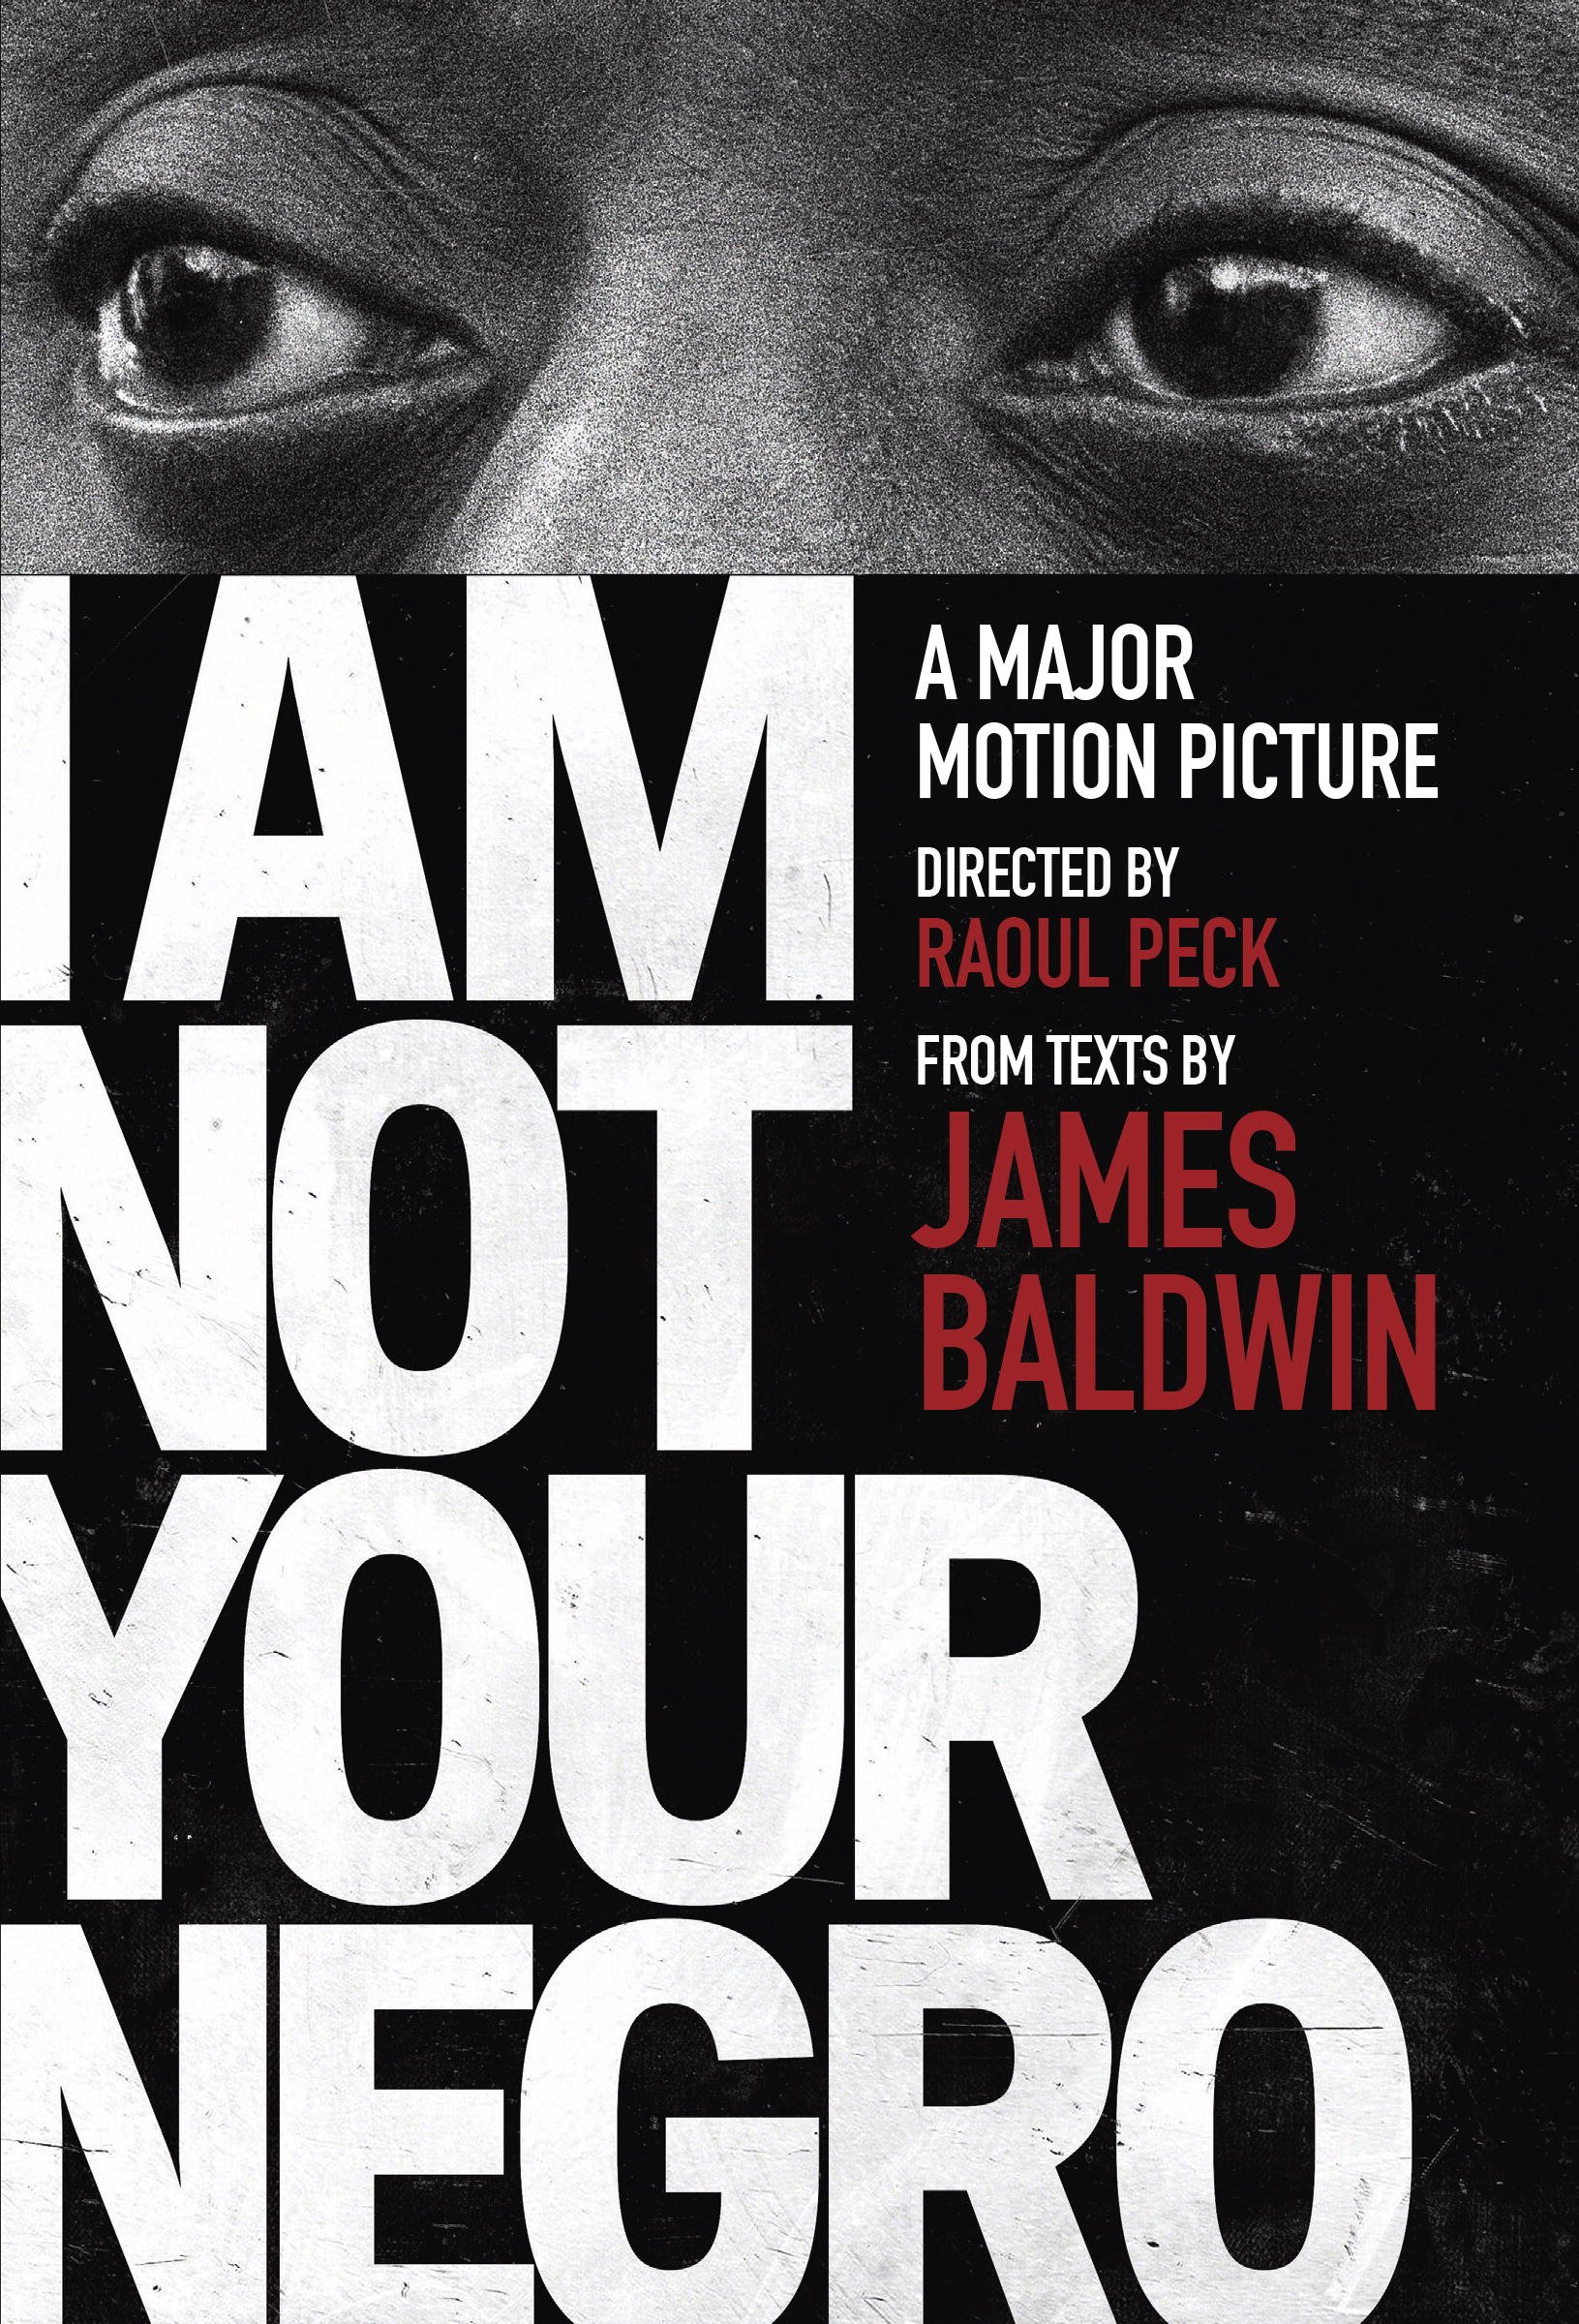 I Am Not Your Negro: A Companion Edition to the Documentary Film Directed by Raoul Peck (Vintage International) (eBook) by James Baldwin, Raoul Peck $2.99